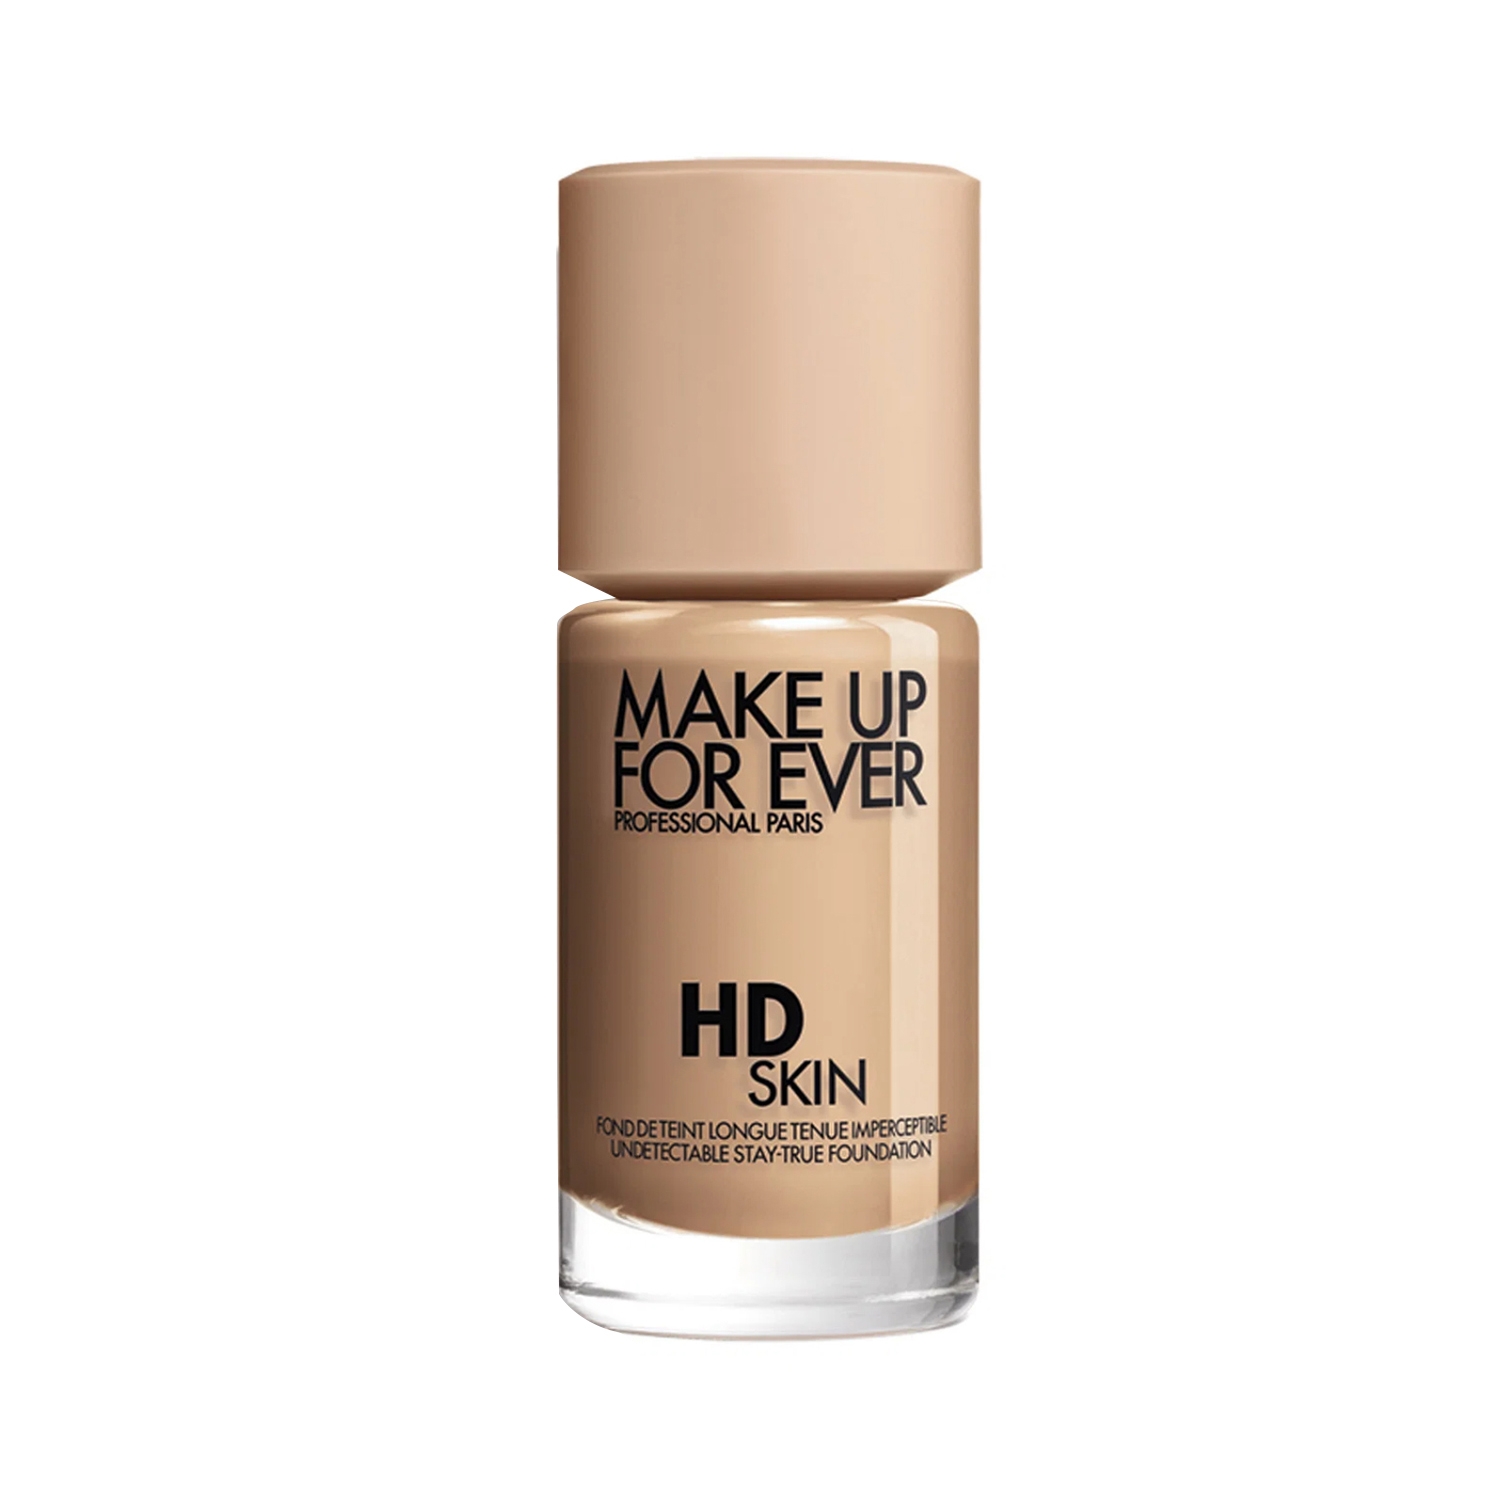 Make Up For Ever | Make Up For Ever Hd Skin Foundation-2N26 (Y315) (30ml)